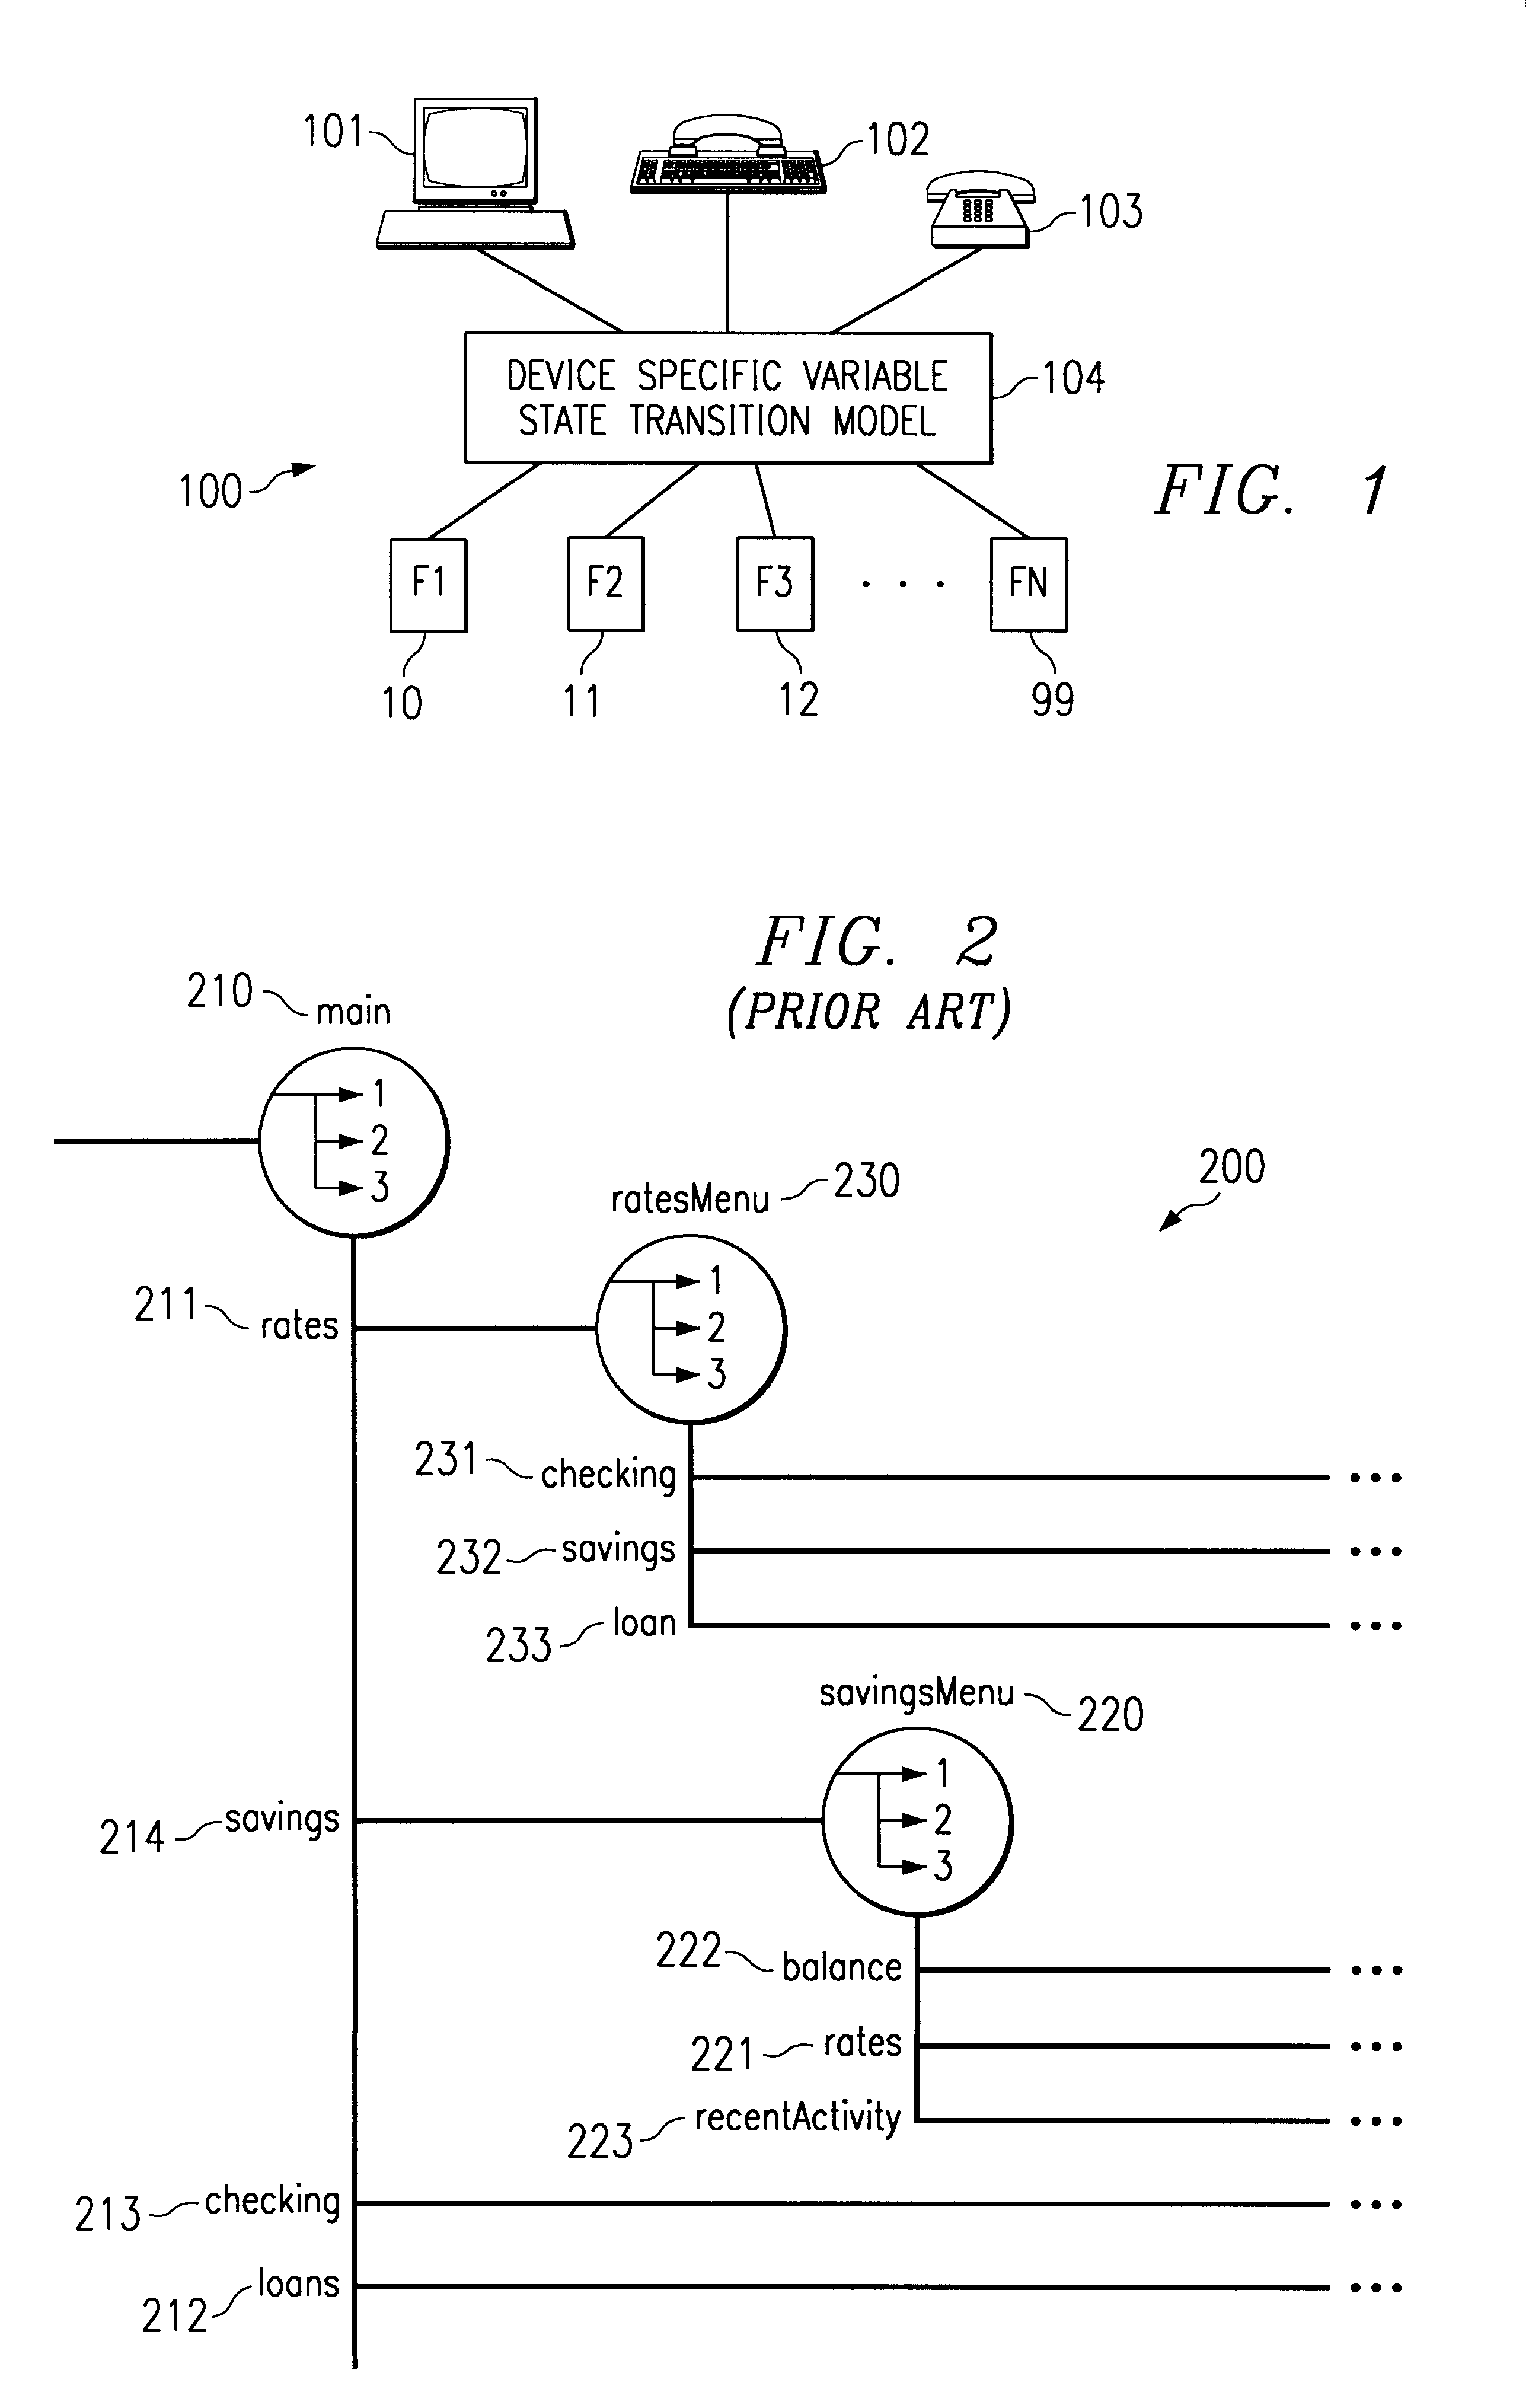 System and method to facilitate speech enabled user interfaces by prompting with possible transaction phrases